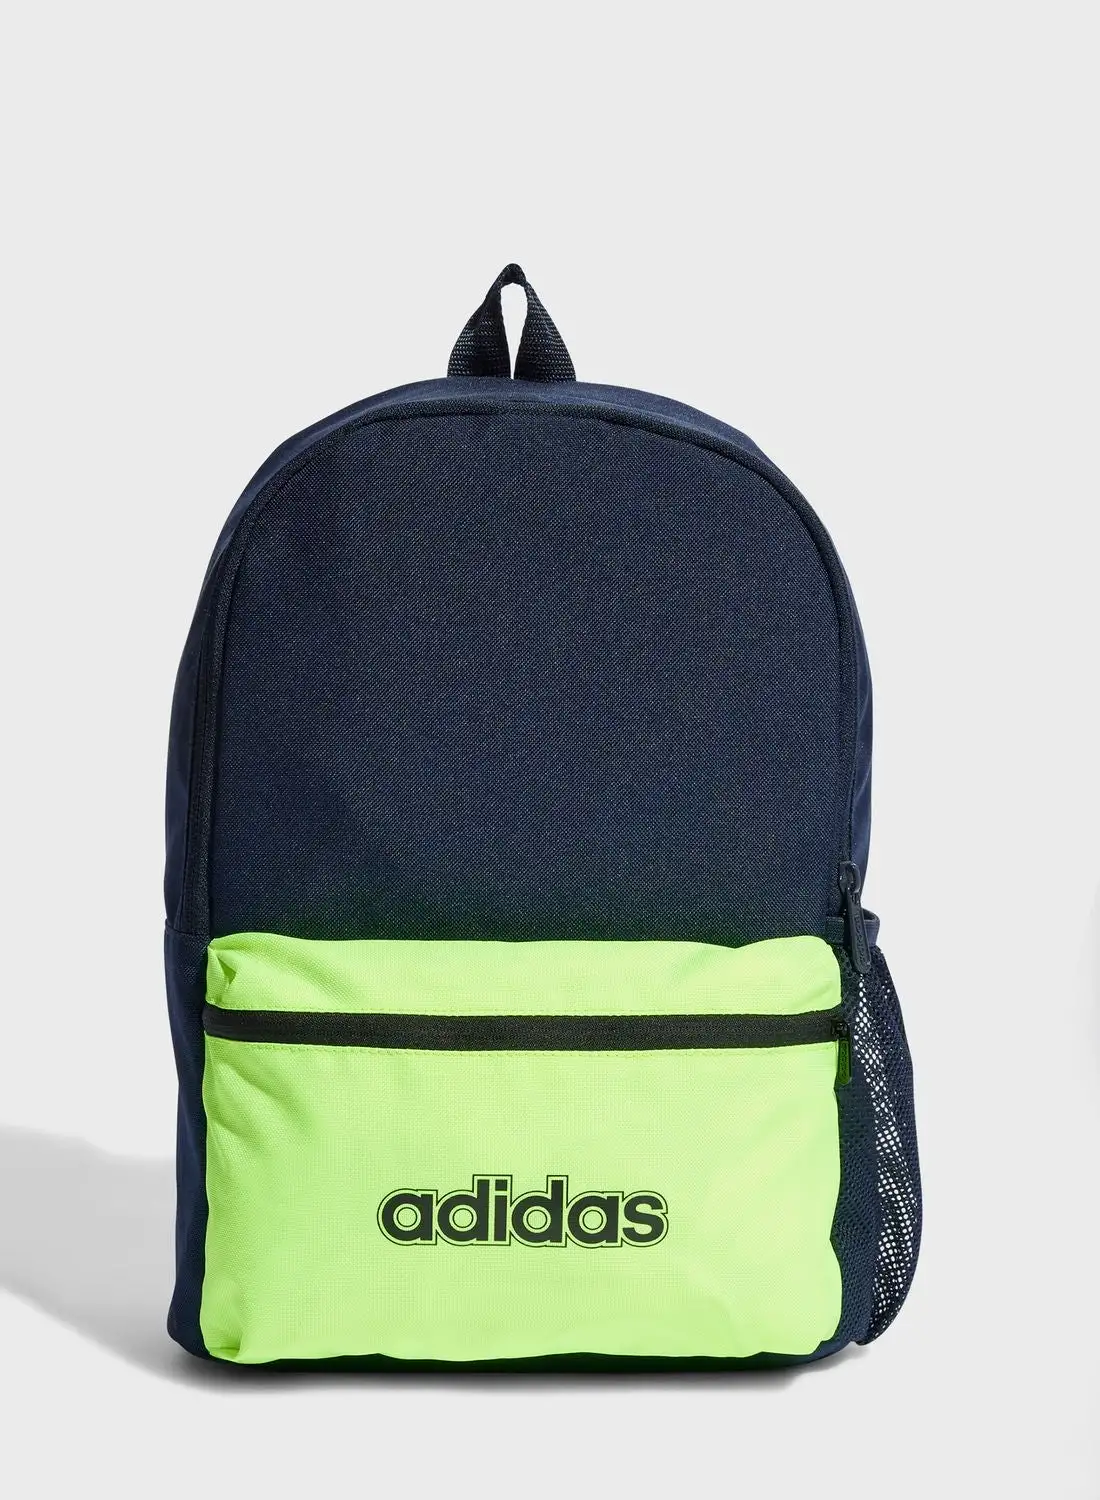 Adidas Graphic Backpack